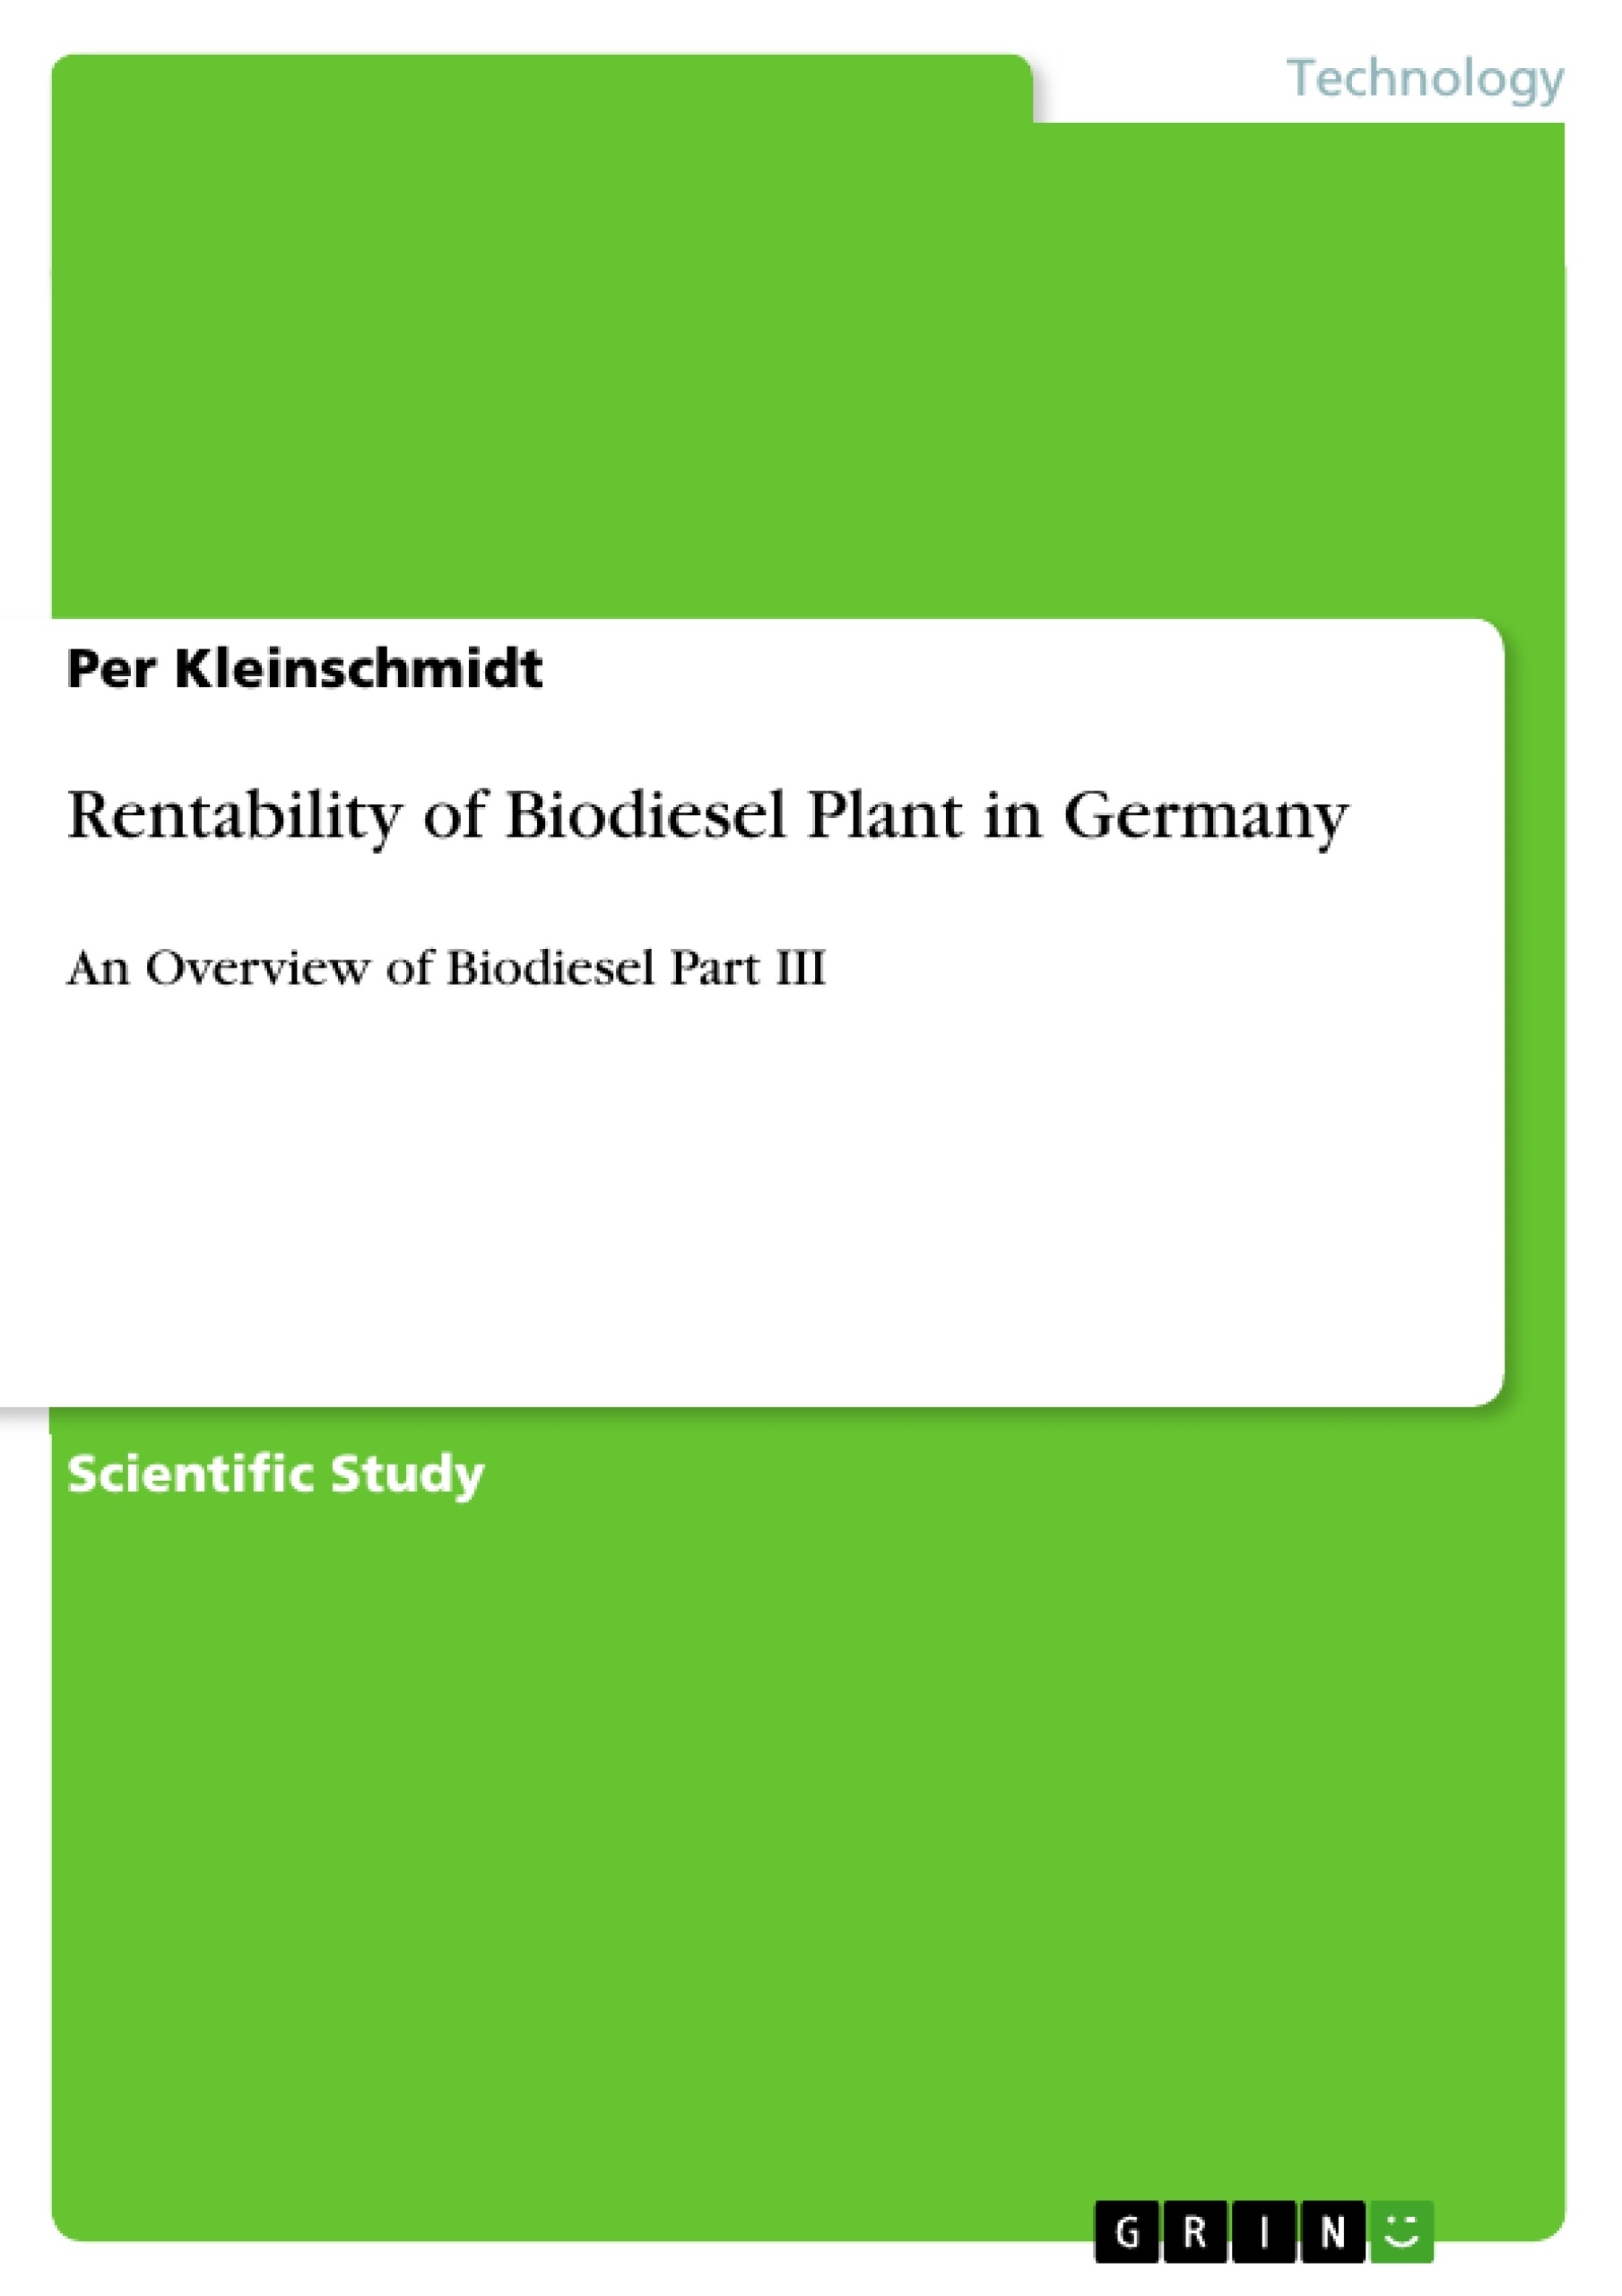 Title: Rentability of Biodiesel Plant in Germany